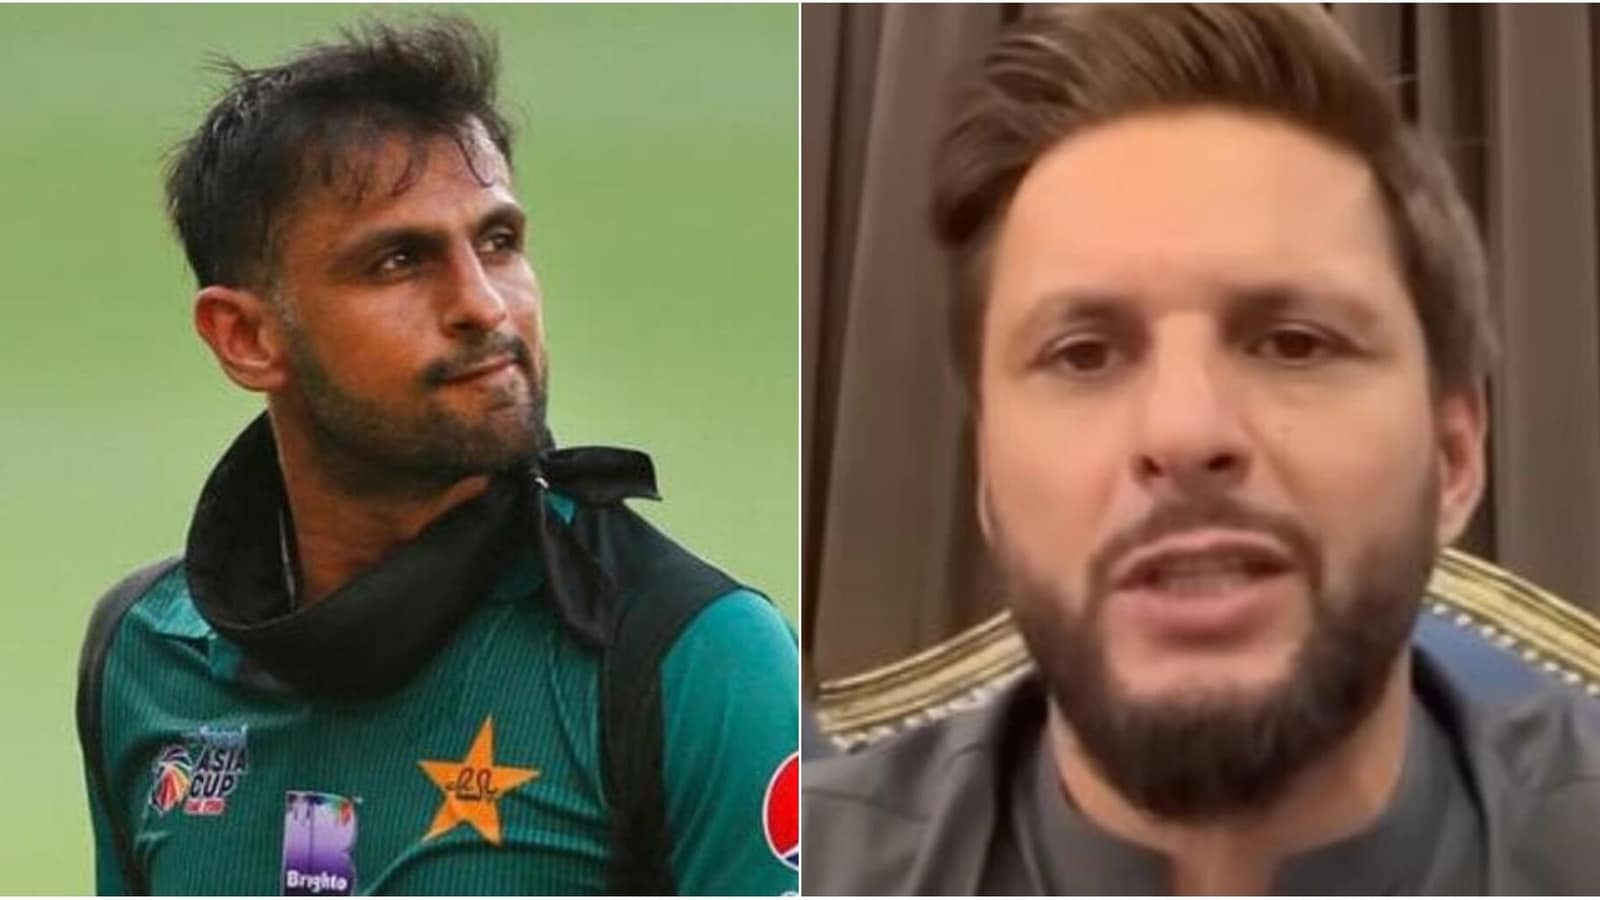 he-should-have-waited-afridi-s-blunt-reaction-to-shoaib-malik-s-controversial-liking-and-disliking-culture-tweet